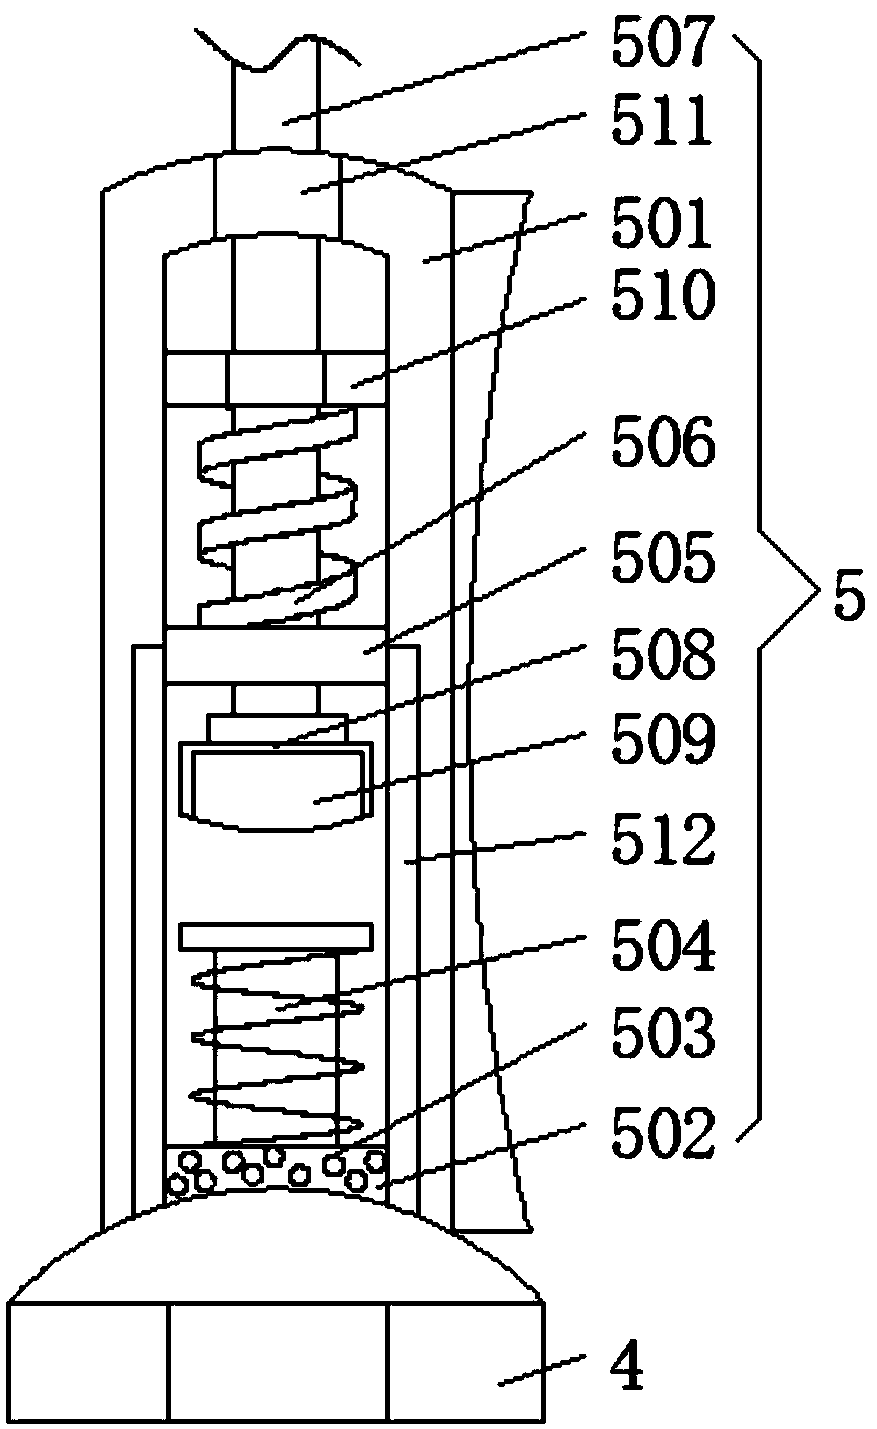 Moxa manufacture and impurity screening device for intermittent magnetic rejection and dust-free processing